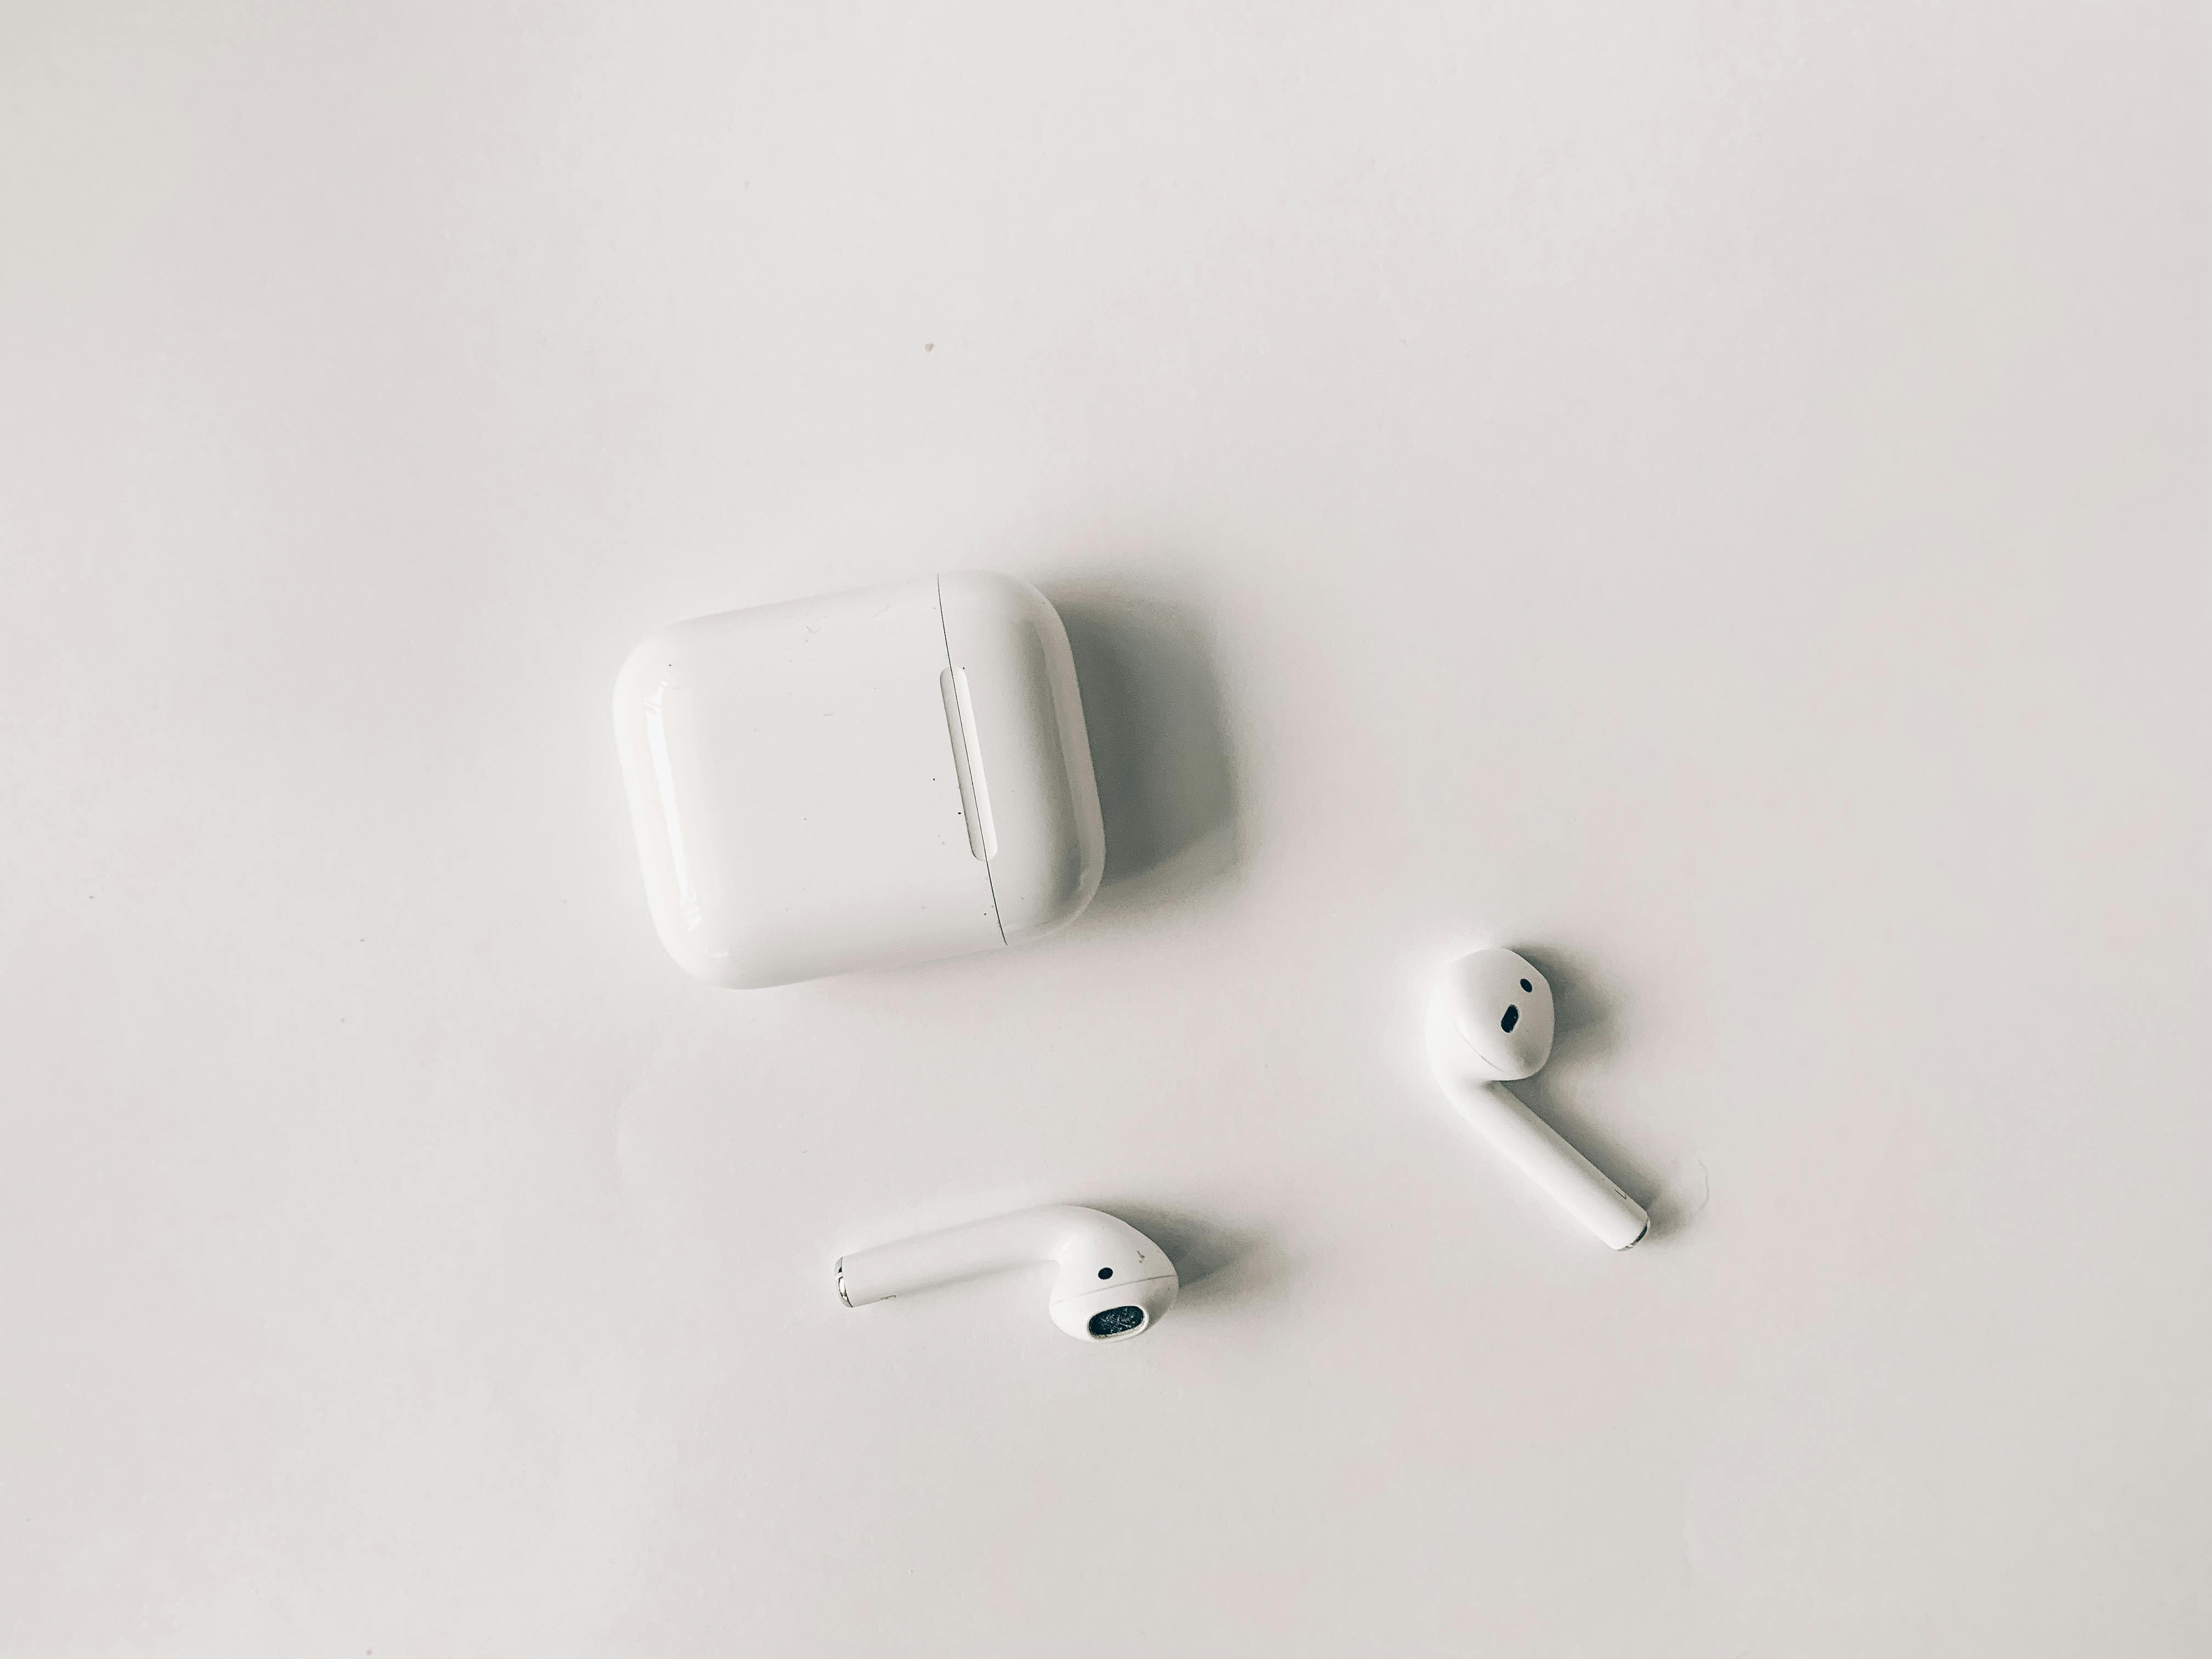 Airpods Photos, Download The BEST Free Airpods & HD Images